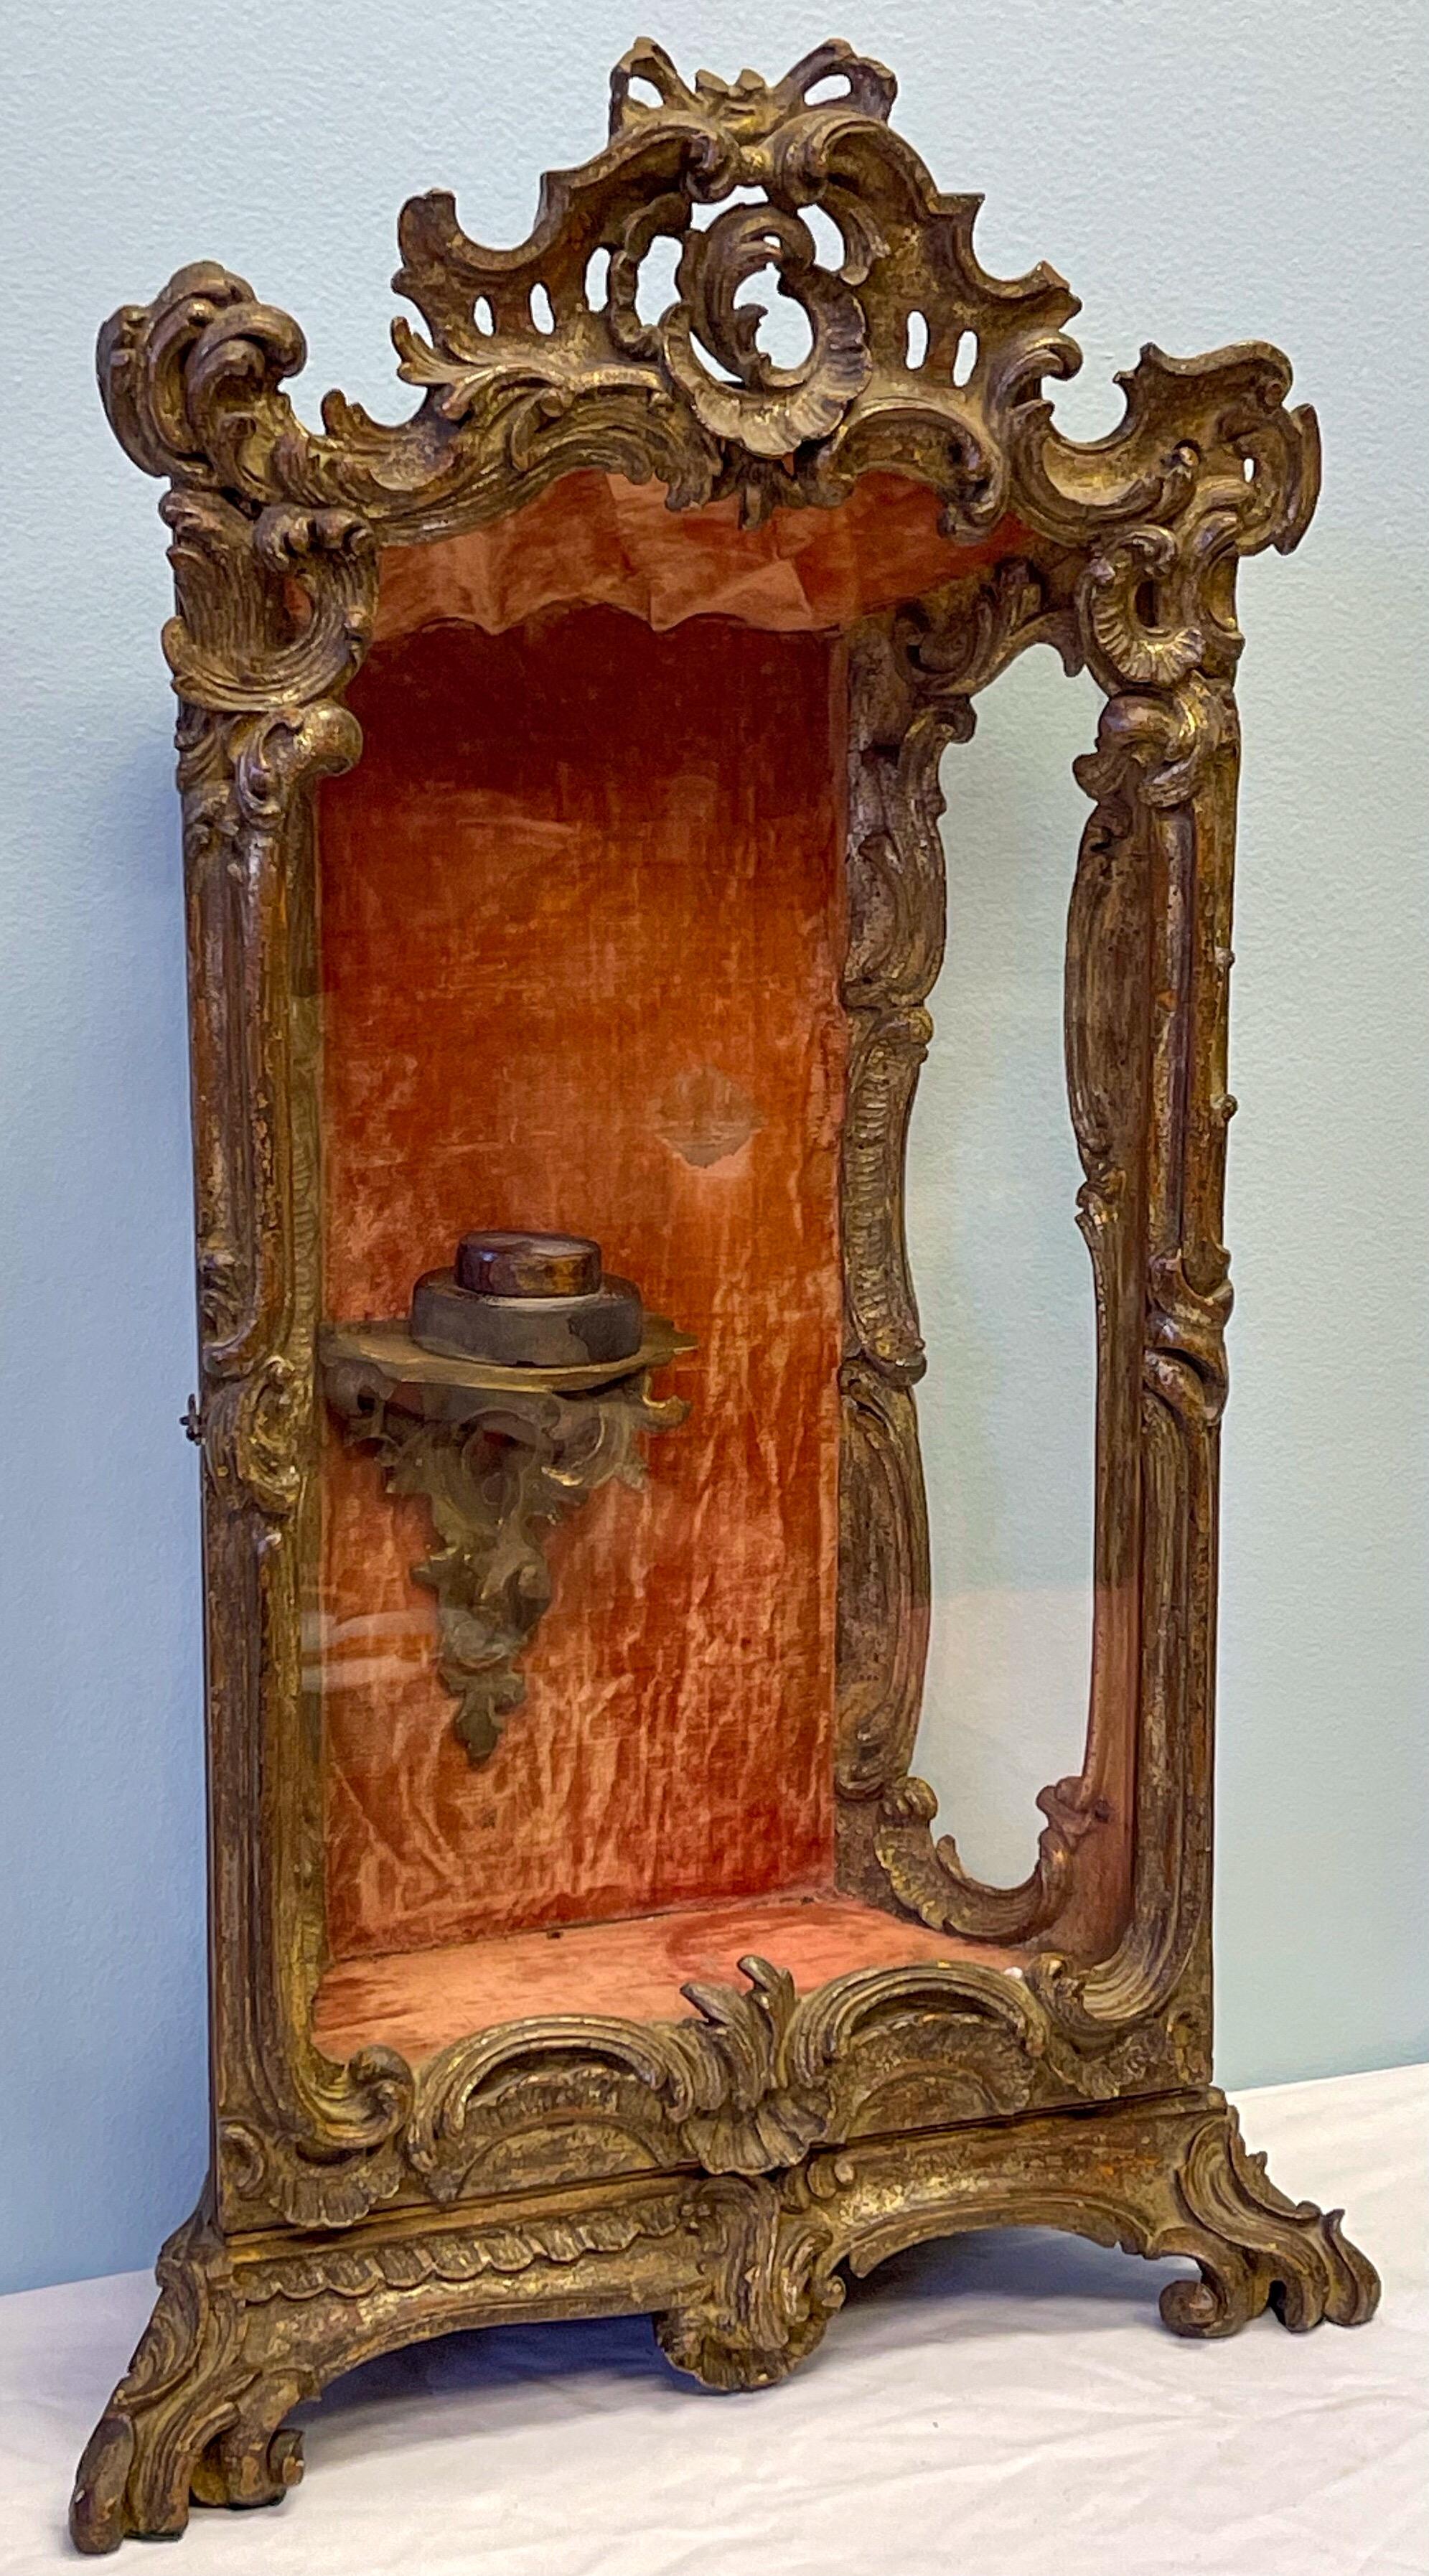 Most favorite Piece! This is a 18th century Italian Rococo carved giltwood table top vitrine or reliquary. It opens to a velvet lined walls and a tiny Rococo wall bracket. It can be hung on the wall. These were often used for religious figures.